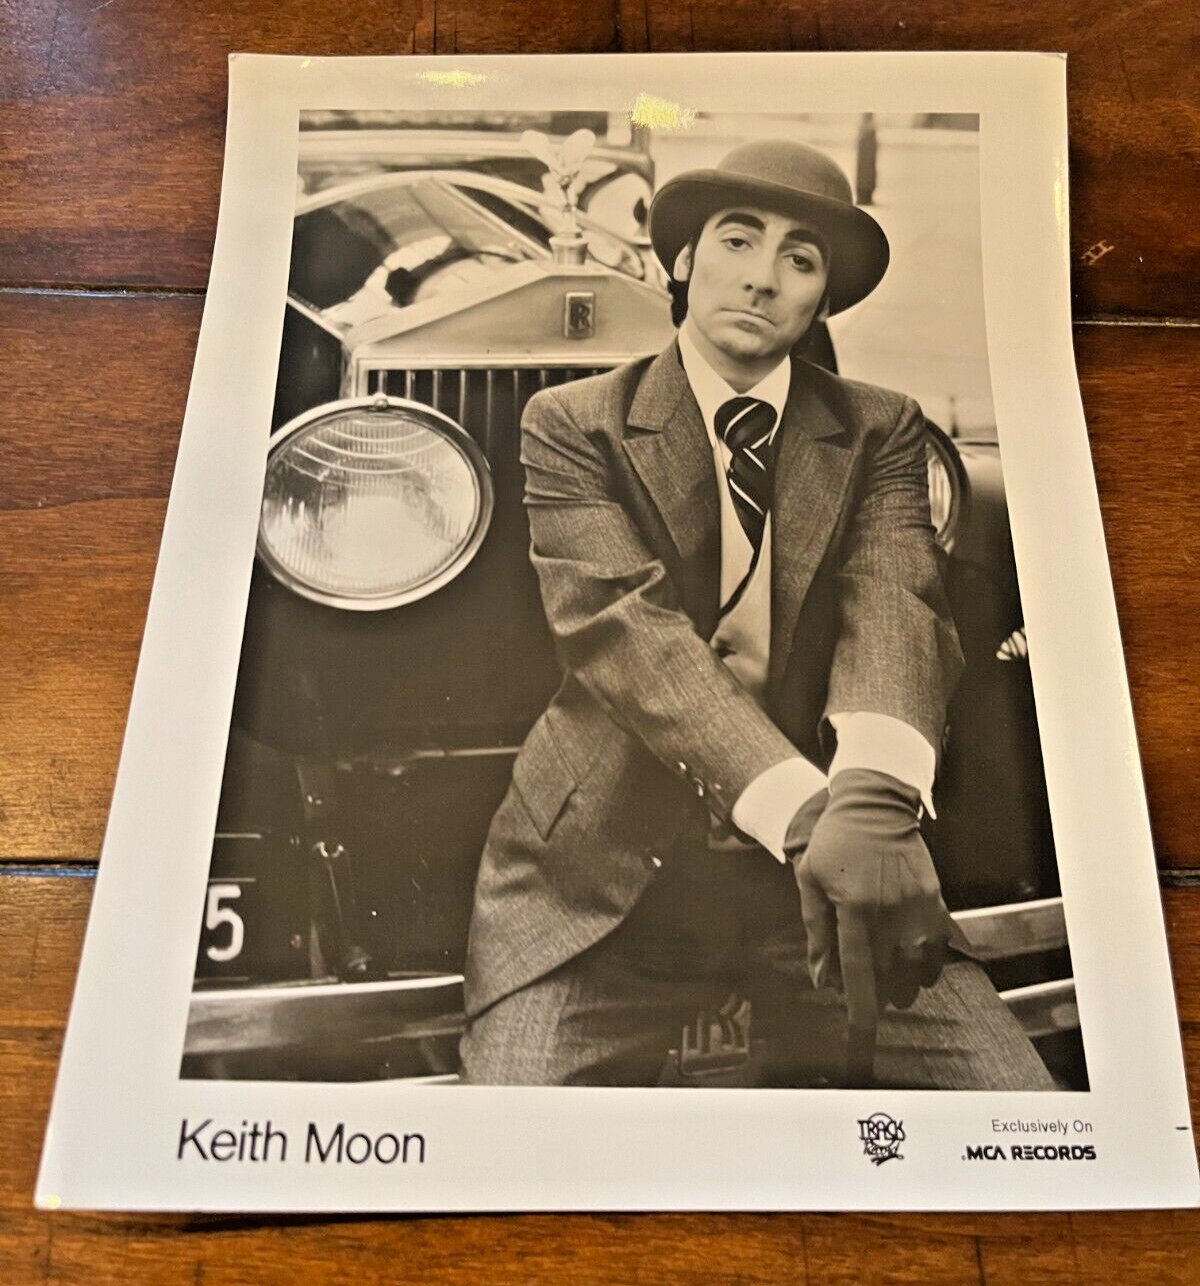 KEITH MOON RARE 1975 Track/MCA 8x10 PROMO PHOTO Two Sides Of The Moon LP THE WHO